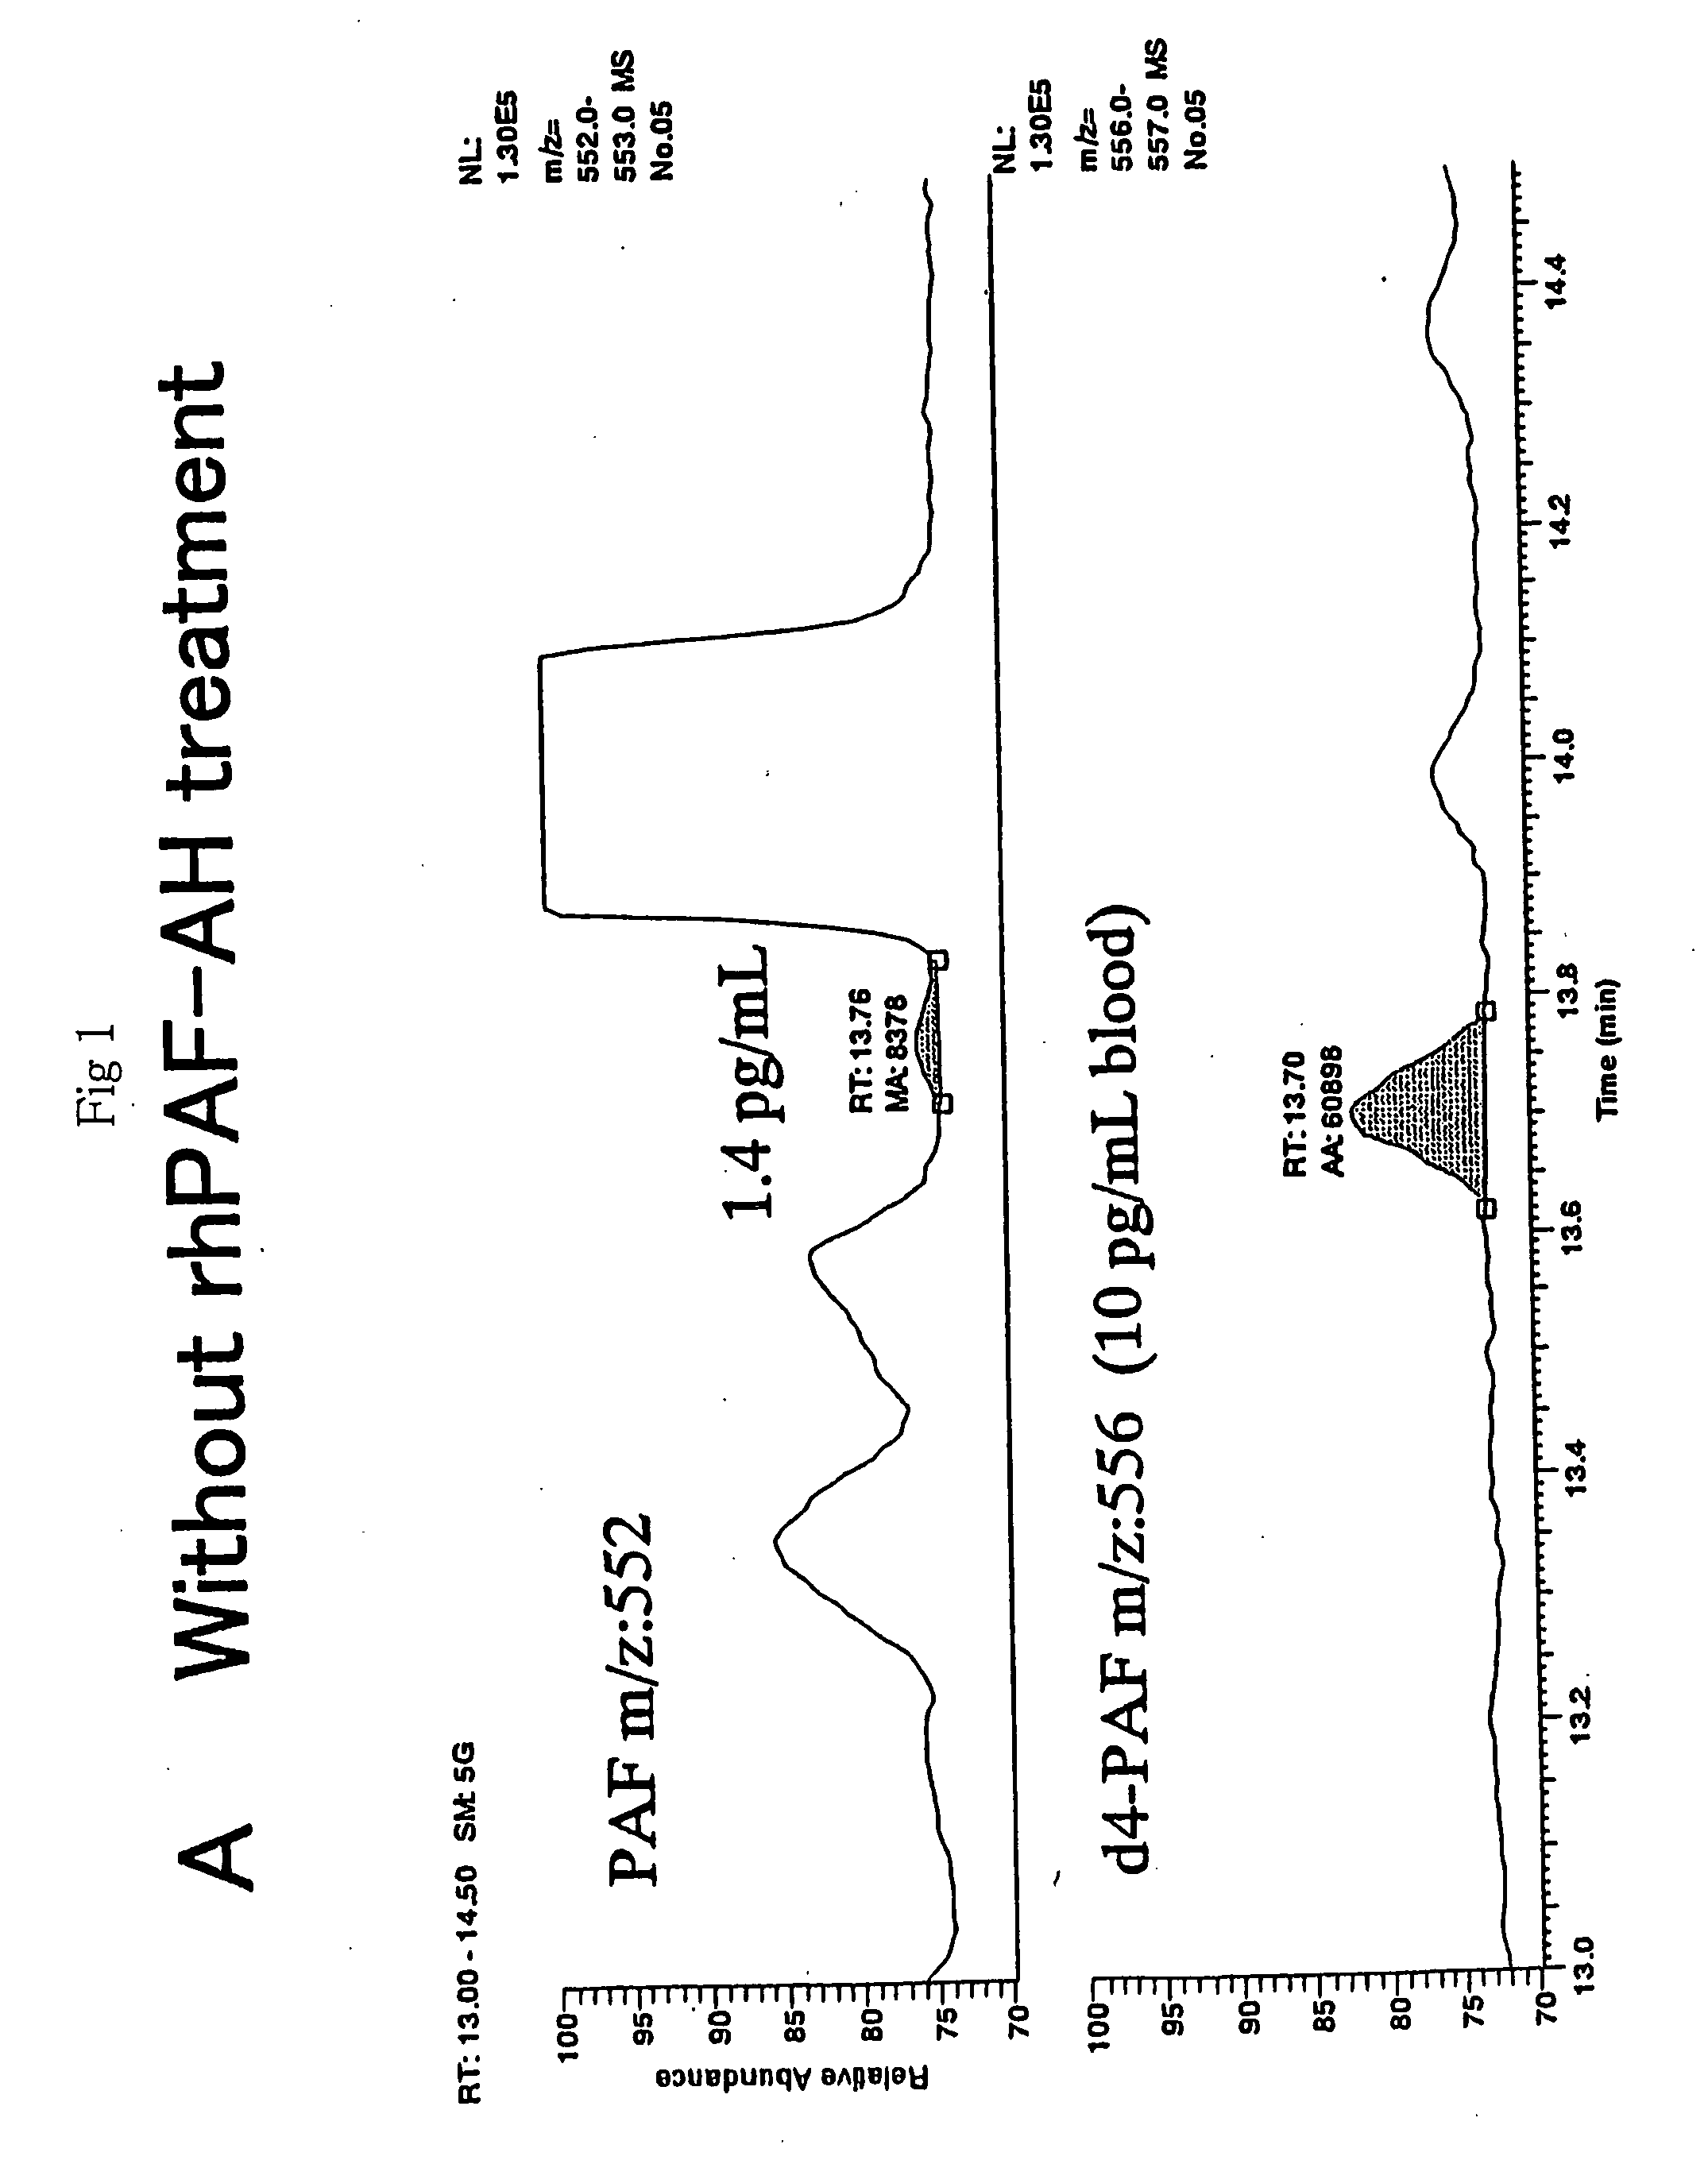 Assay method for platelet-activating factor